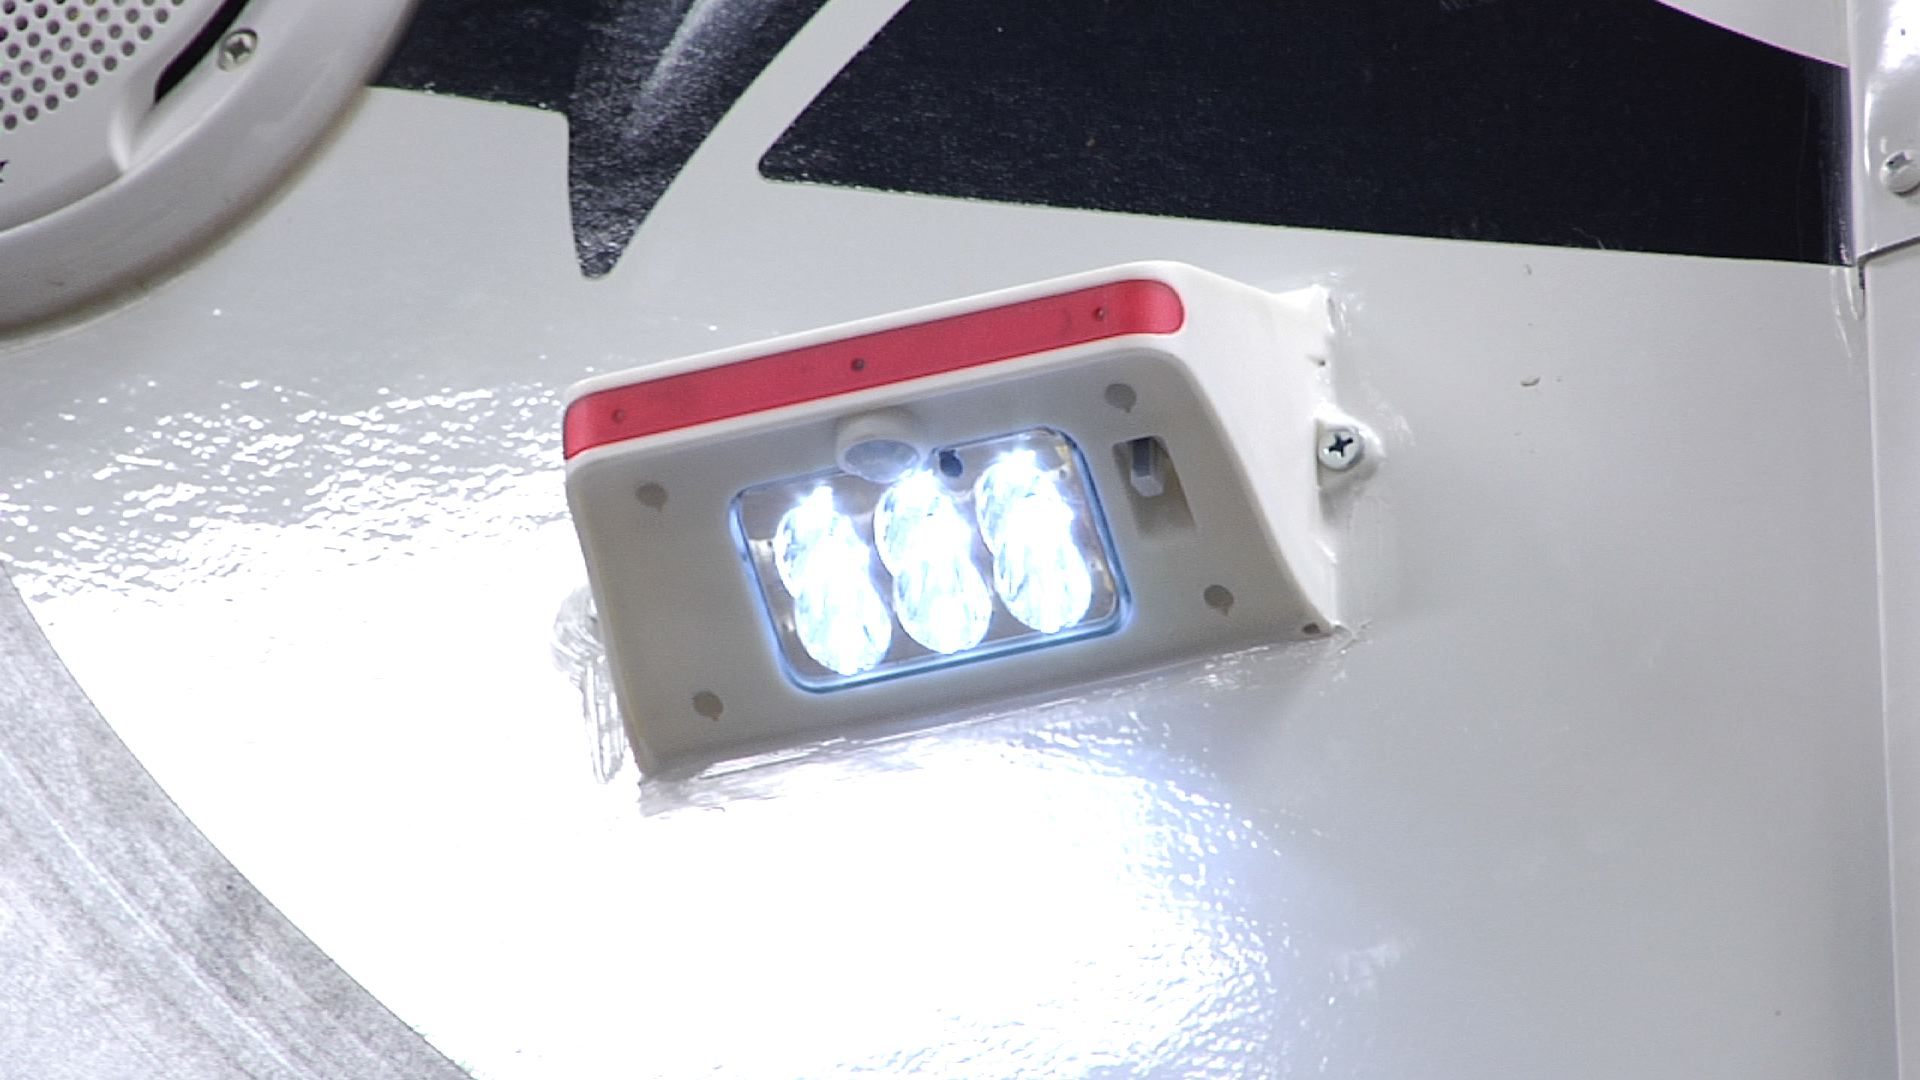 Install motion-activated lights near or around your RV's refrigerator door